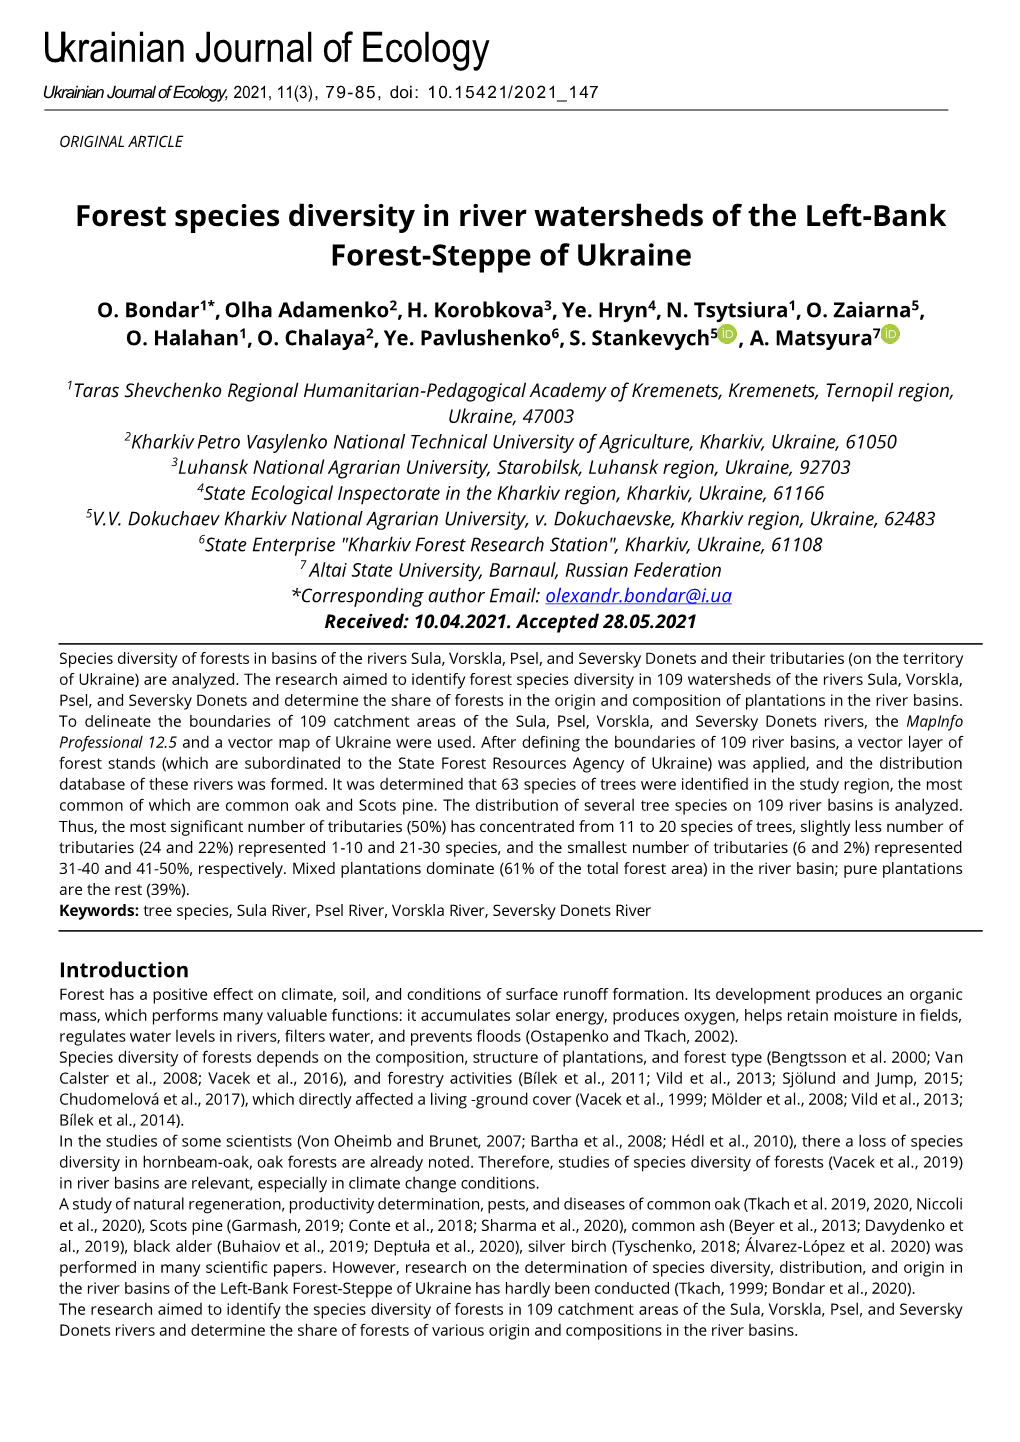 Forest Species Diversity in River Watersheds of the Left-Bank Forest-Steppe of Ukraine